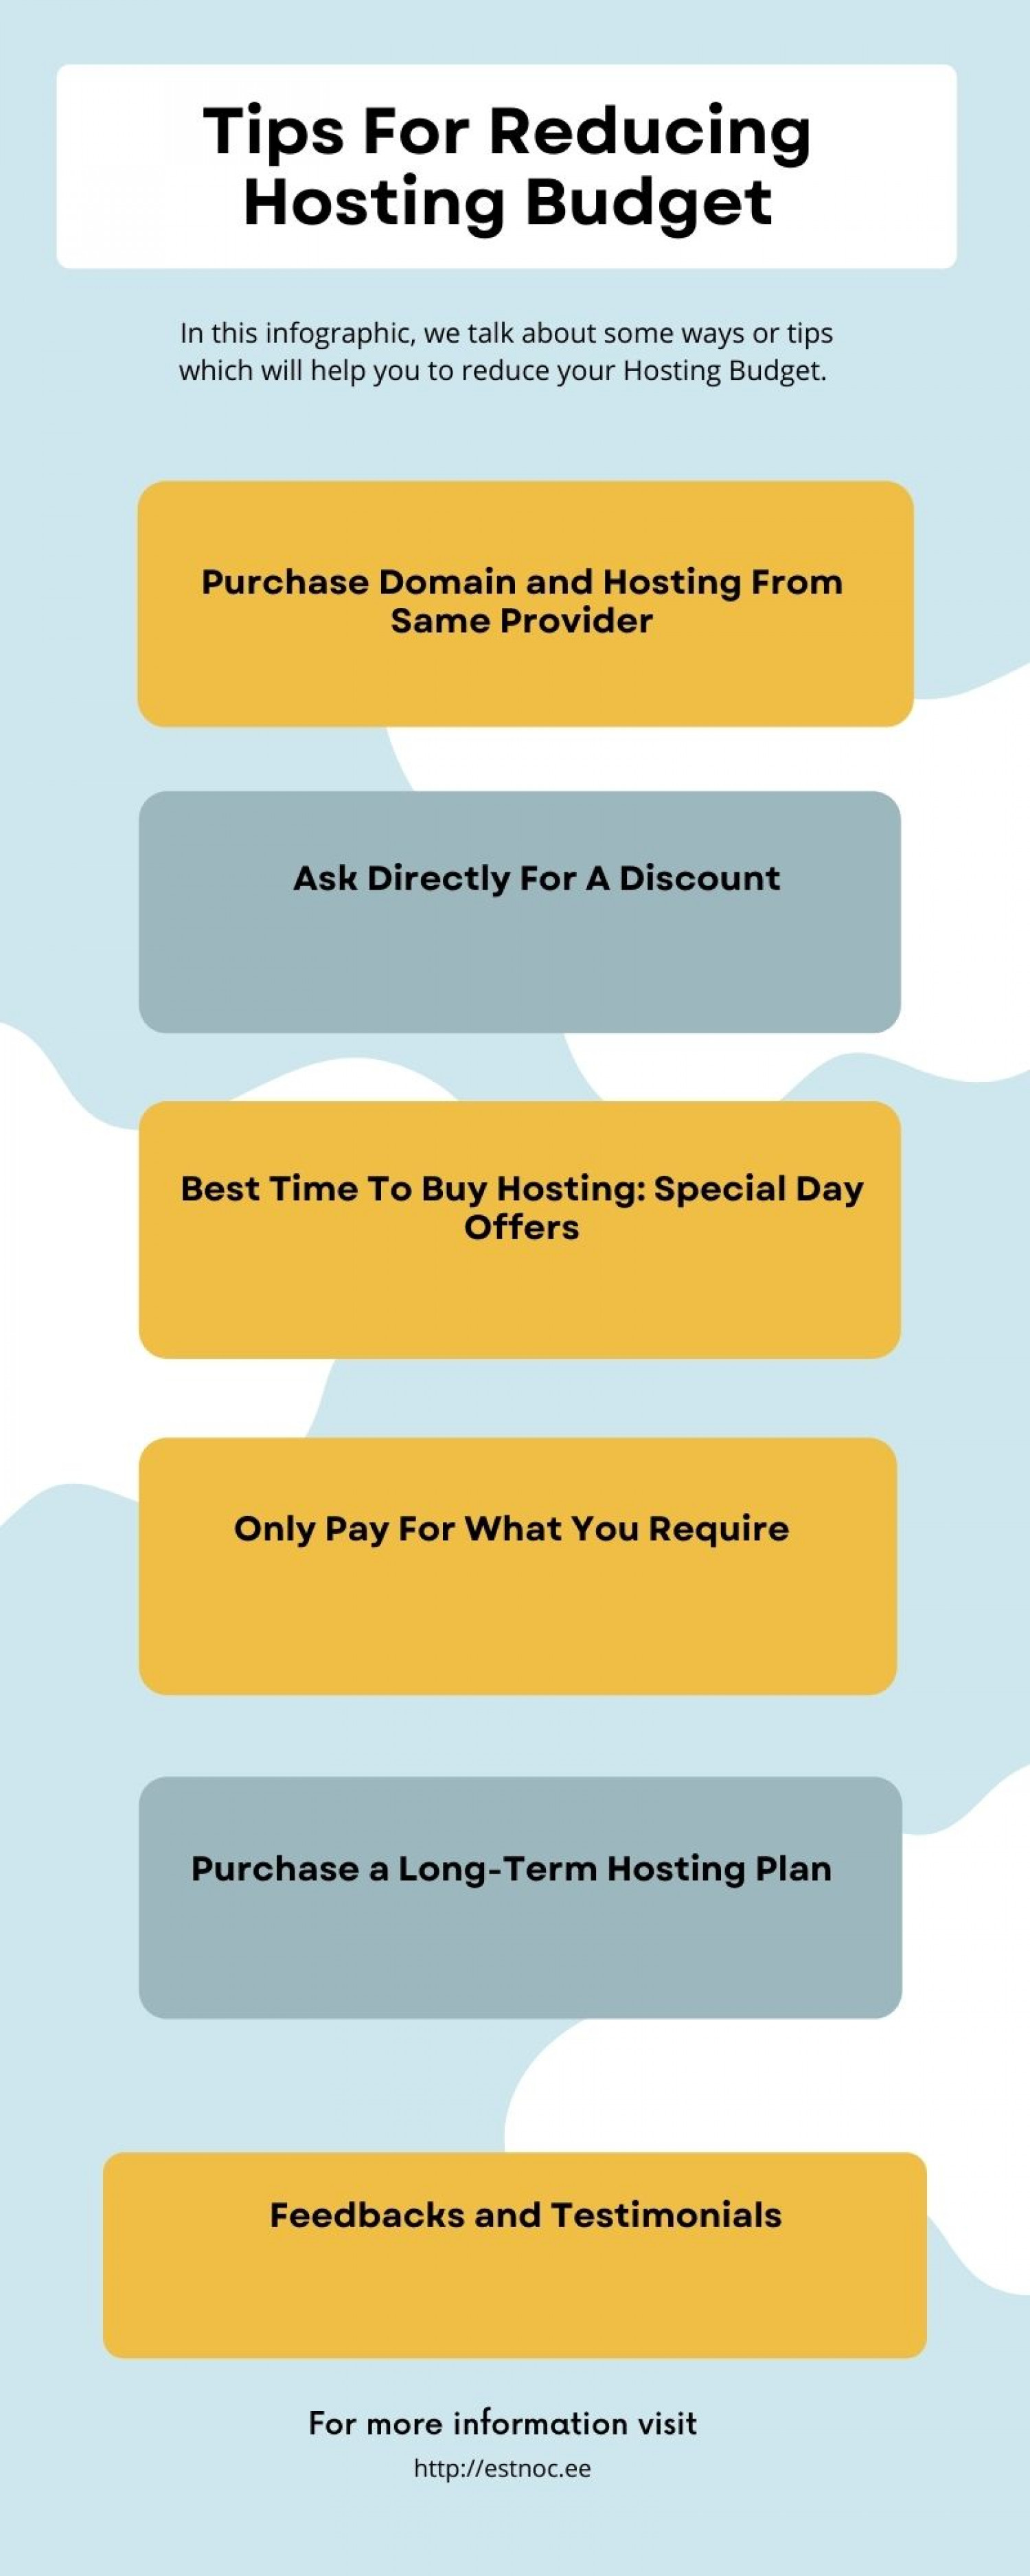 Tips For Reducing Hosting Budget Infographic